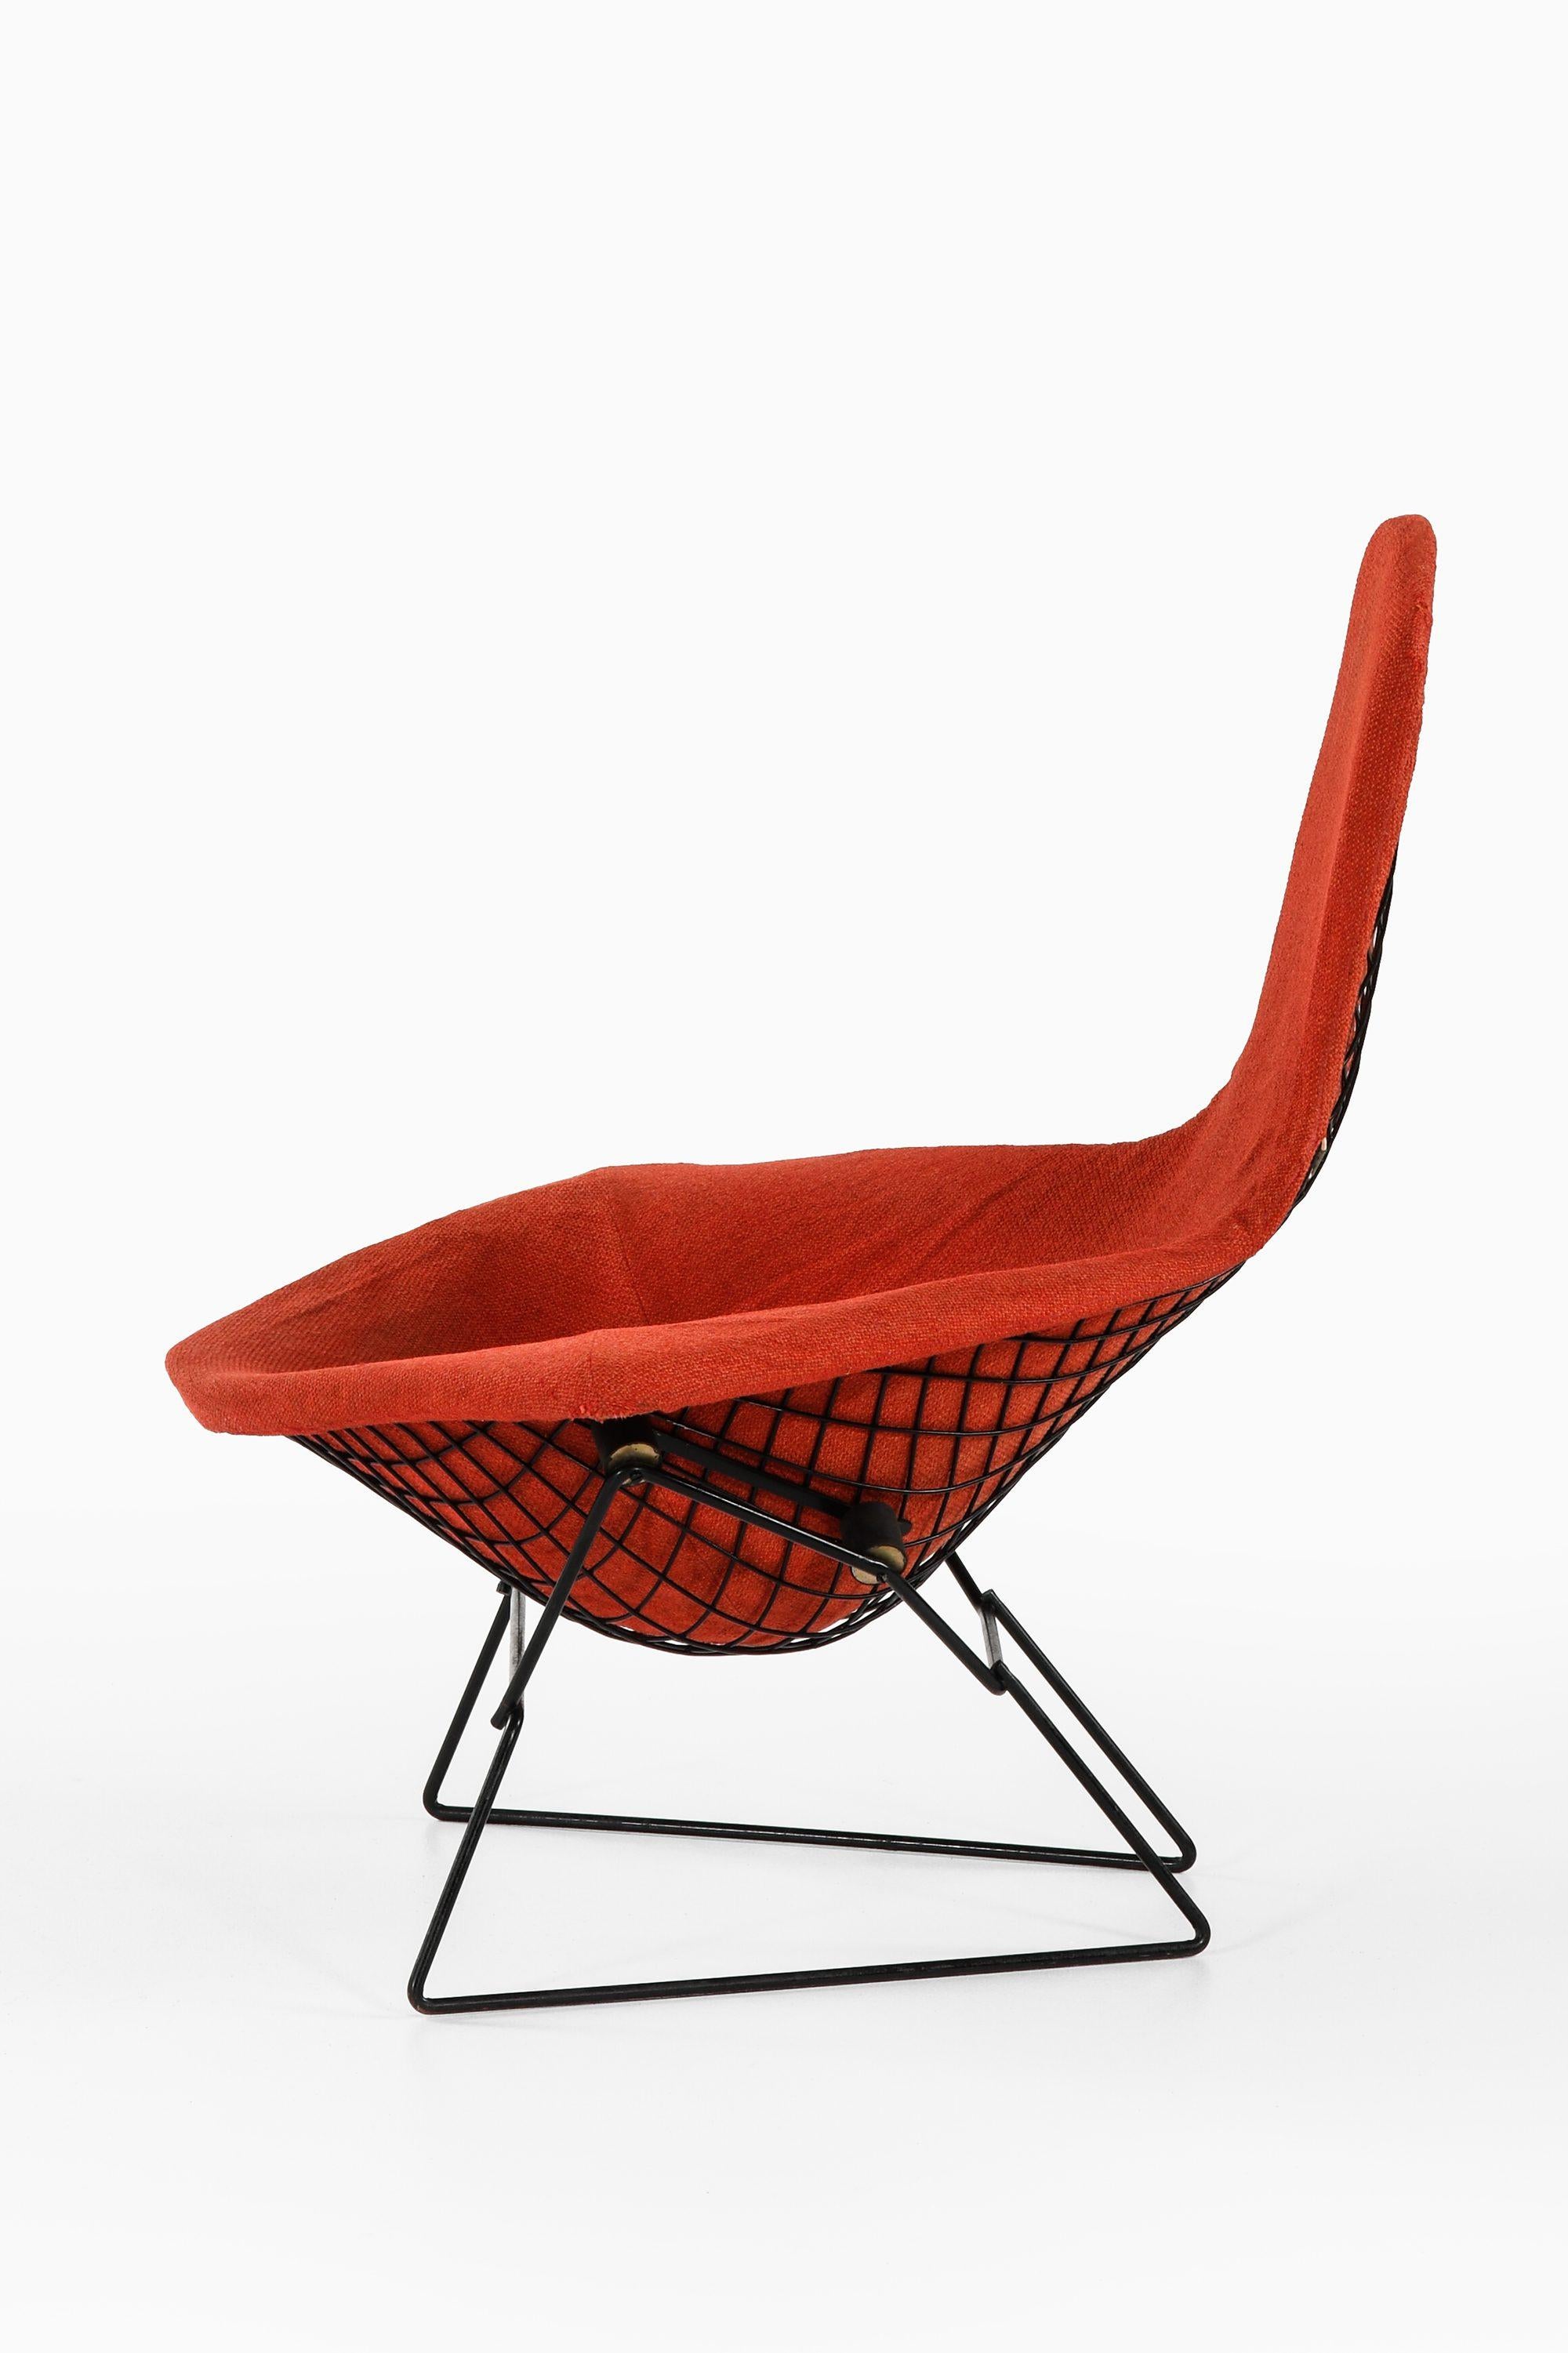 American Easy Bird Chair in Black Lacquered Metal and Red Fabric by Harry Bertoia, 1950s For Sale